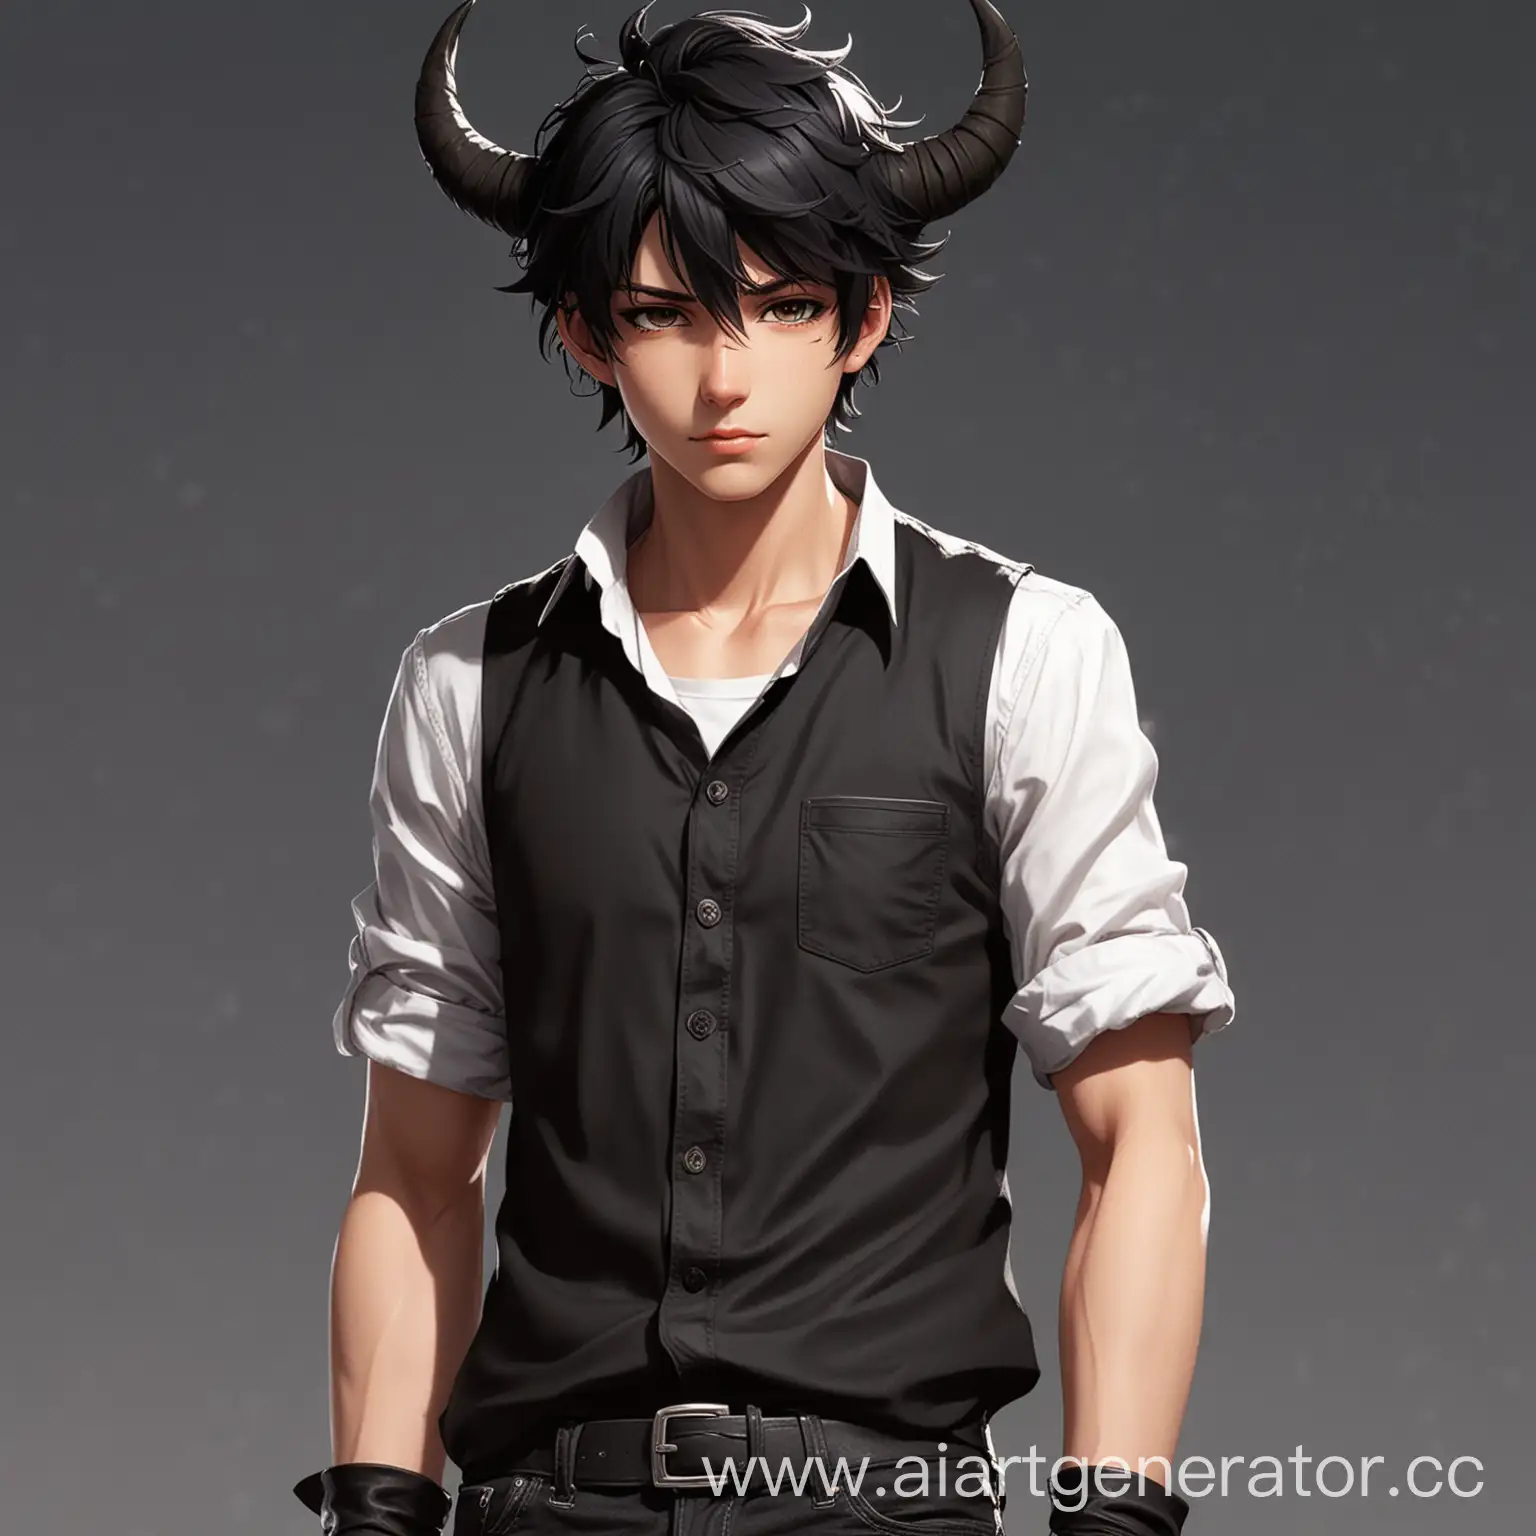 Anime-Boy-with-PitchBlack-Features-and-Horns-Dark-Fantasy-Character-Martin